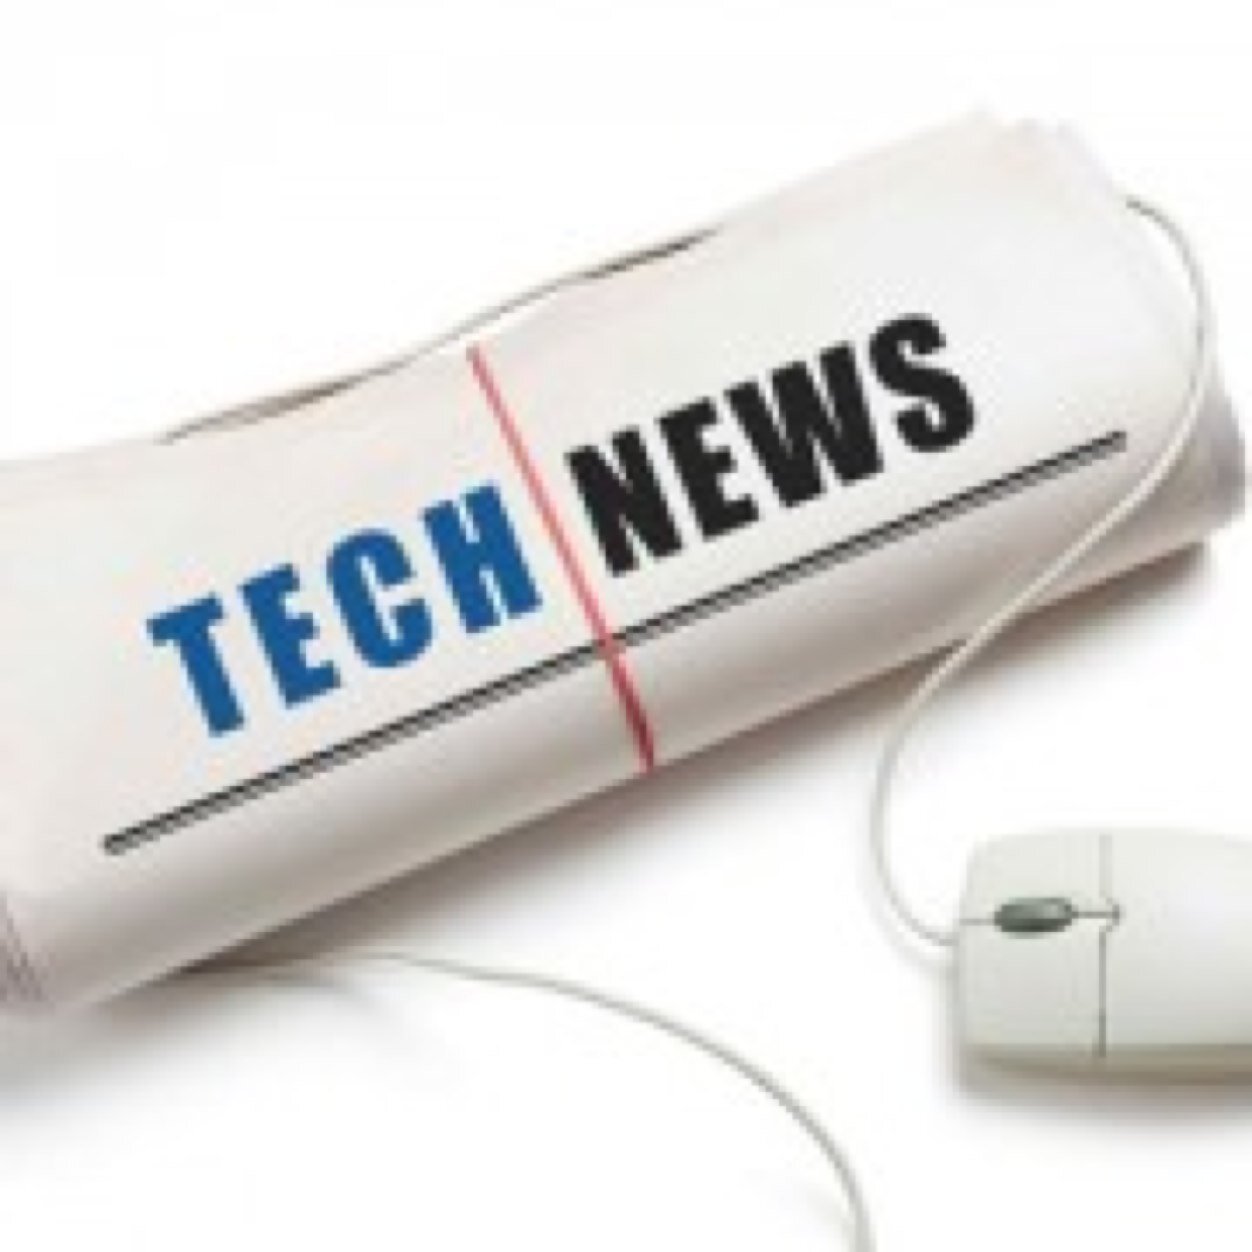 Visit our site to stay up to date on the latest news in the tech world.